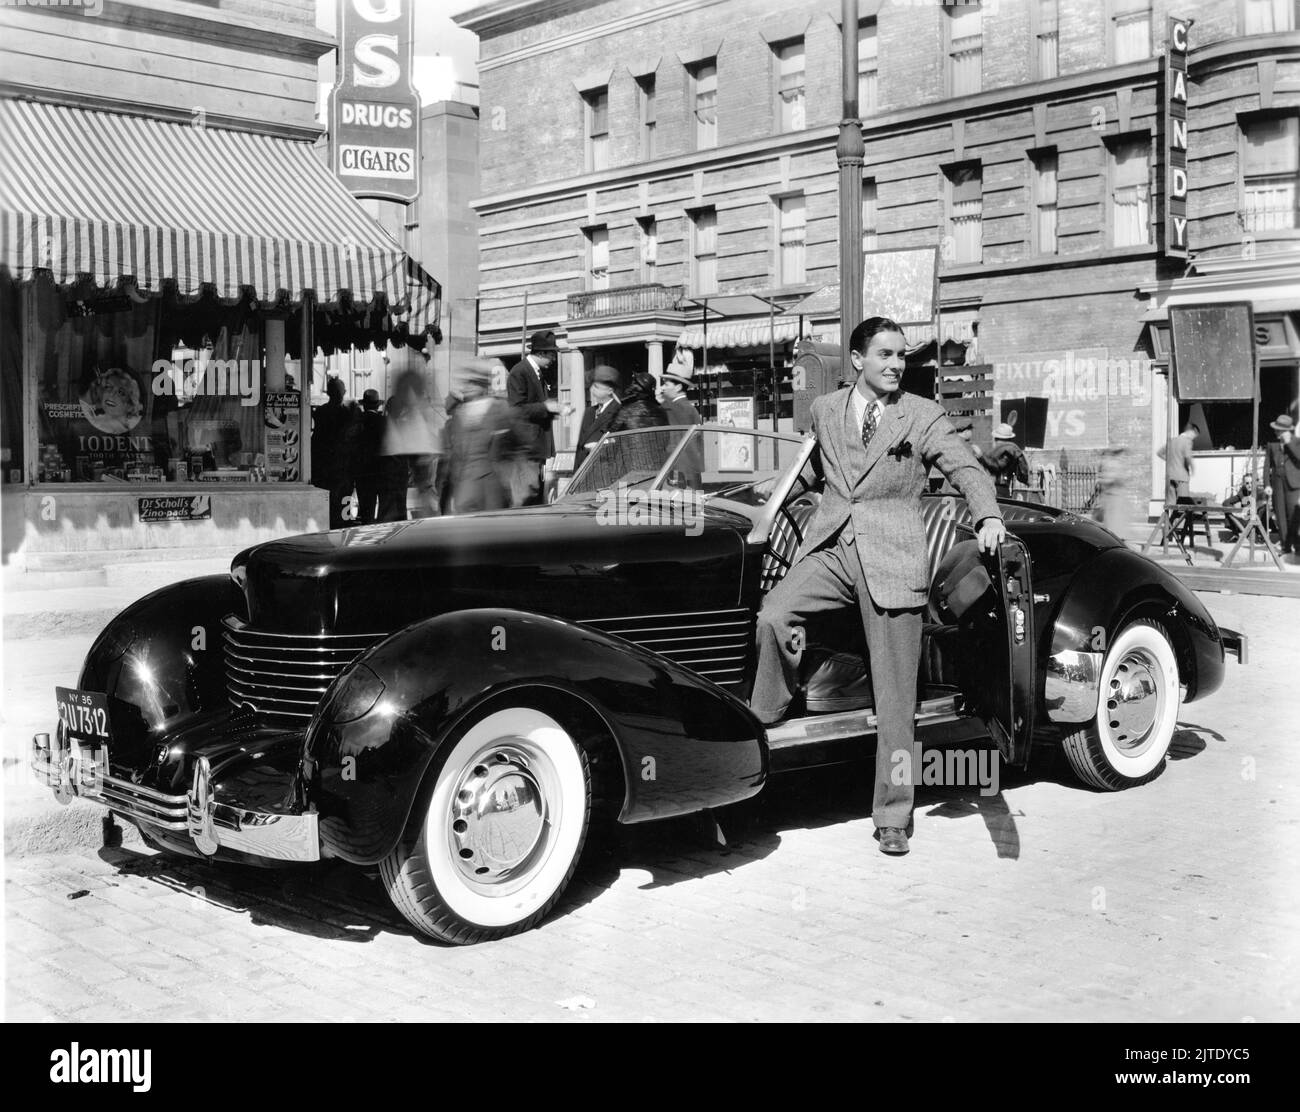 TYRONE POWER in poses with 1936 Auburn Cord 810 Phaeton automobile / car on set candid publicity for Twentieth Century Fox Stock Photo